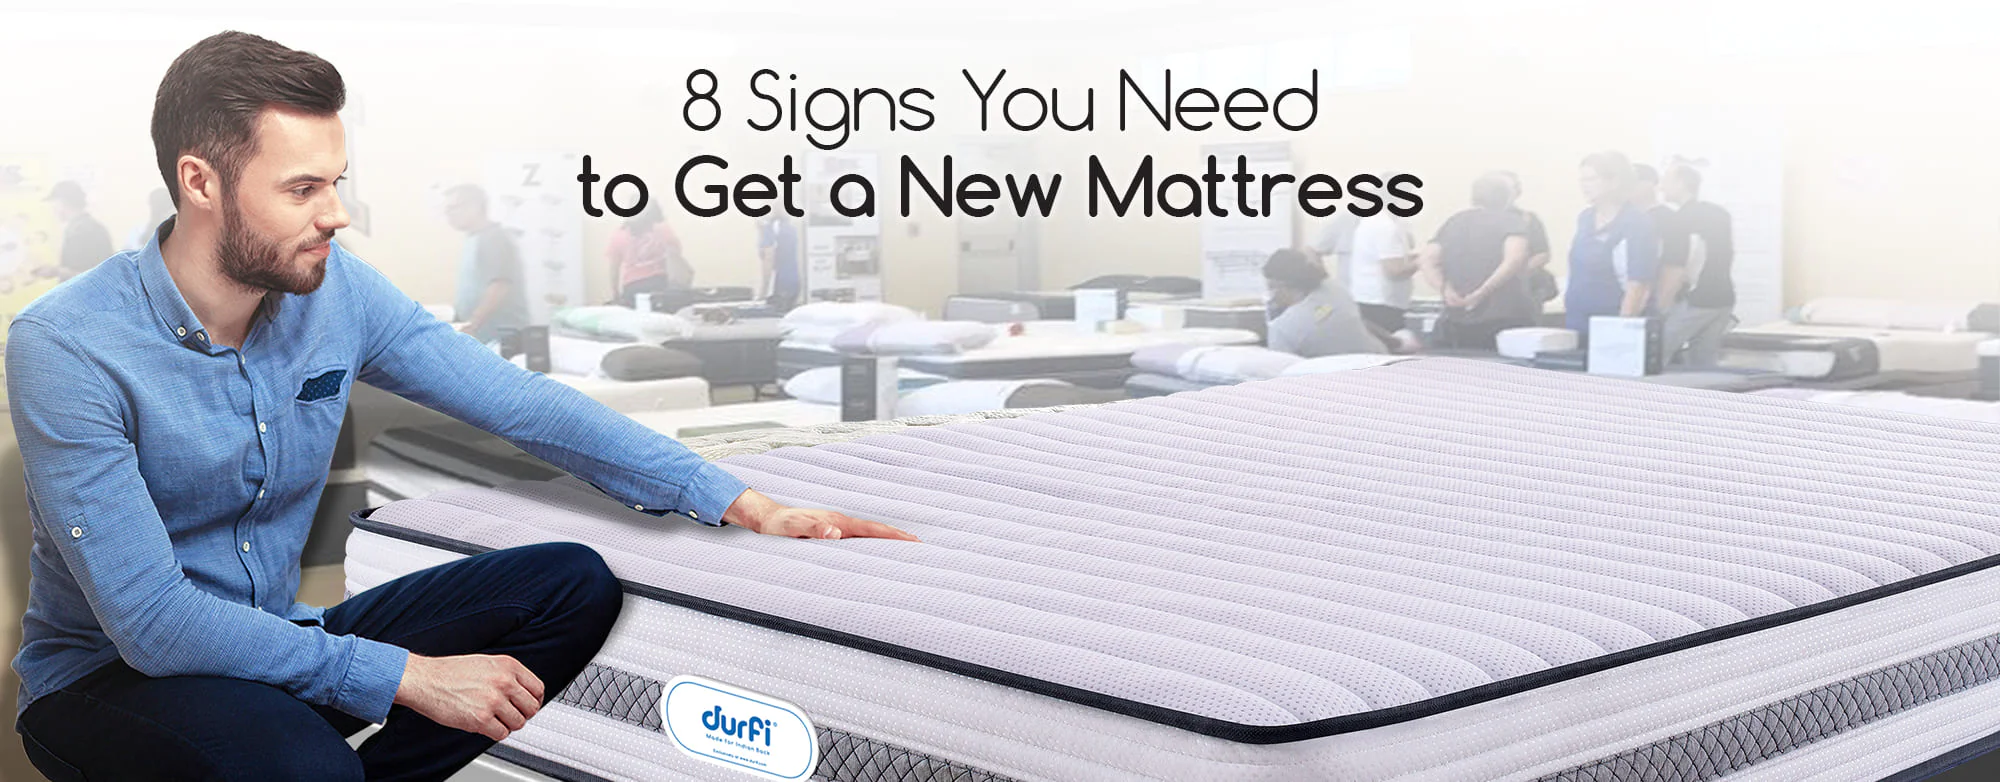 6 Signs You Need a New Mattress